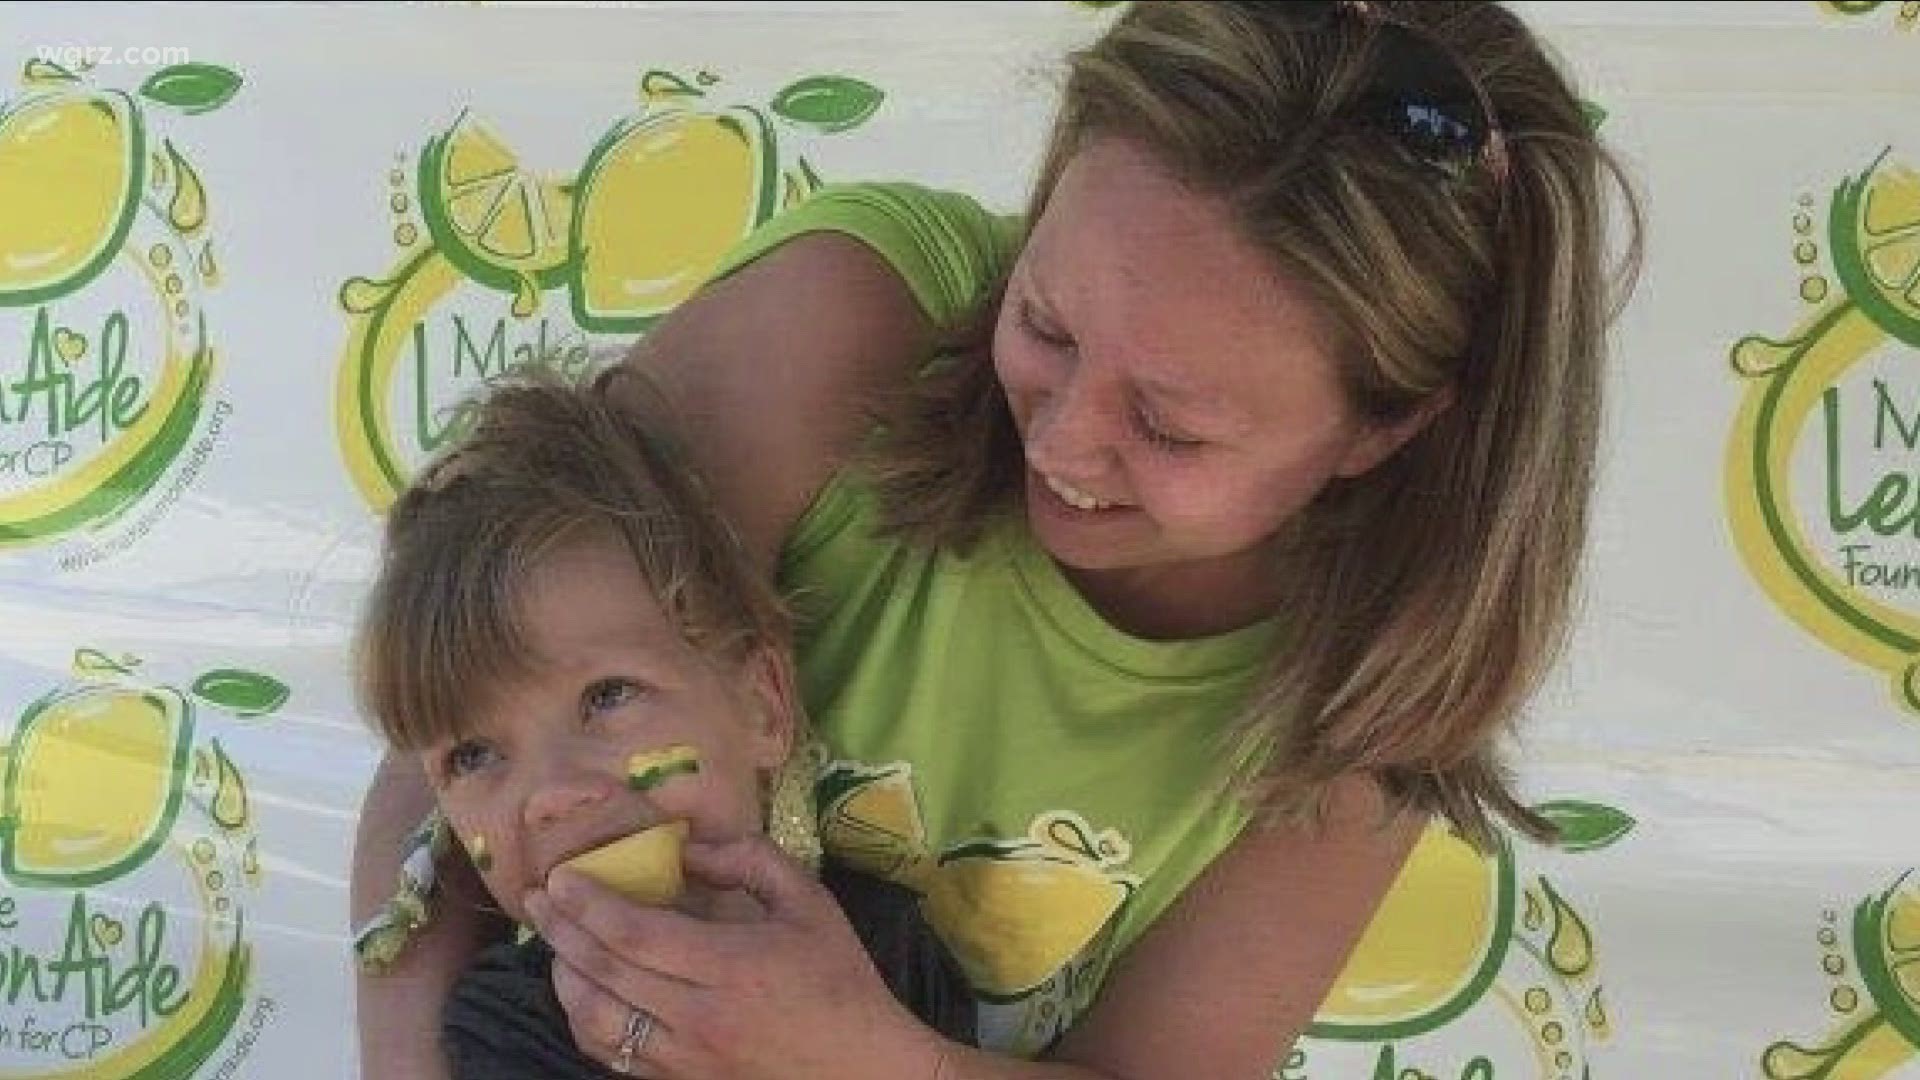 The Make Lemon Aide Foundation for Cerebral Palsy reimagined its annual walk this year, and is launching "Laps of Love" on Sunday.